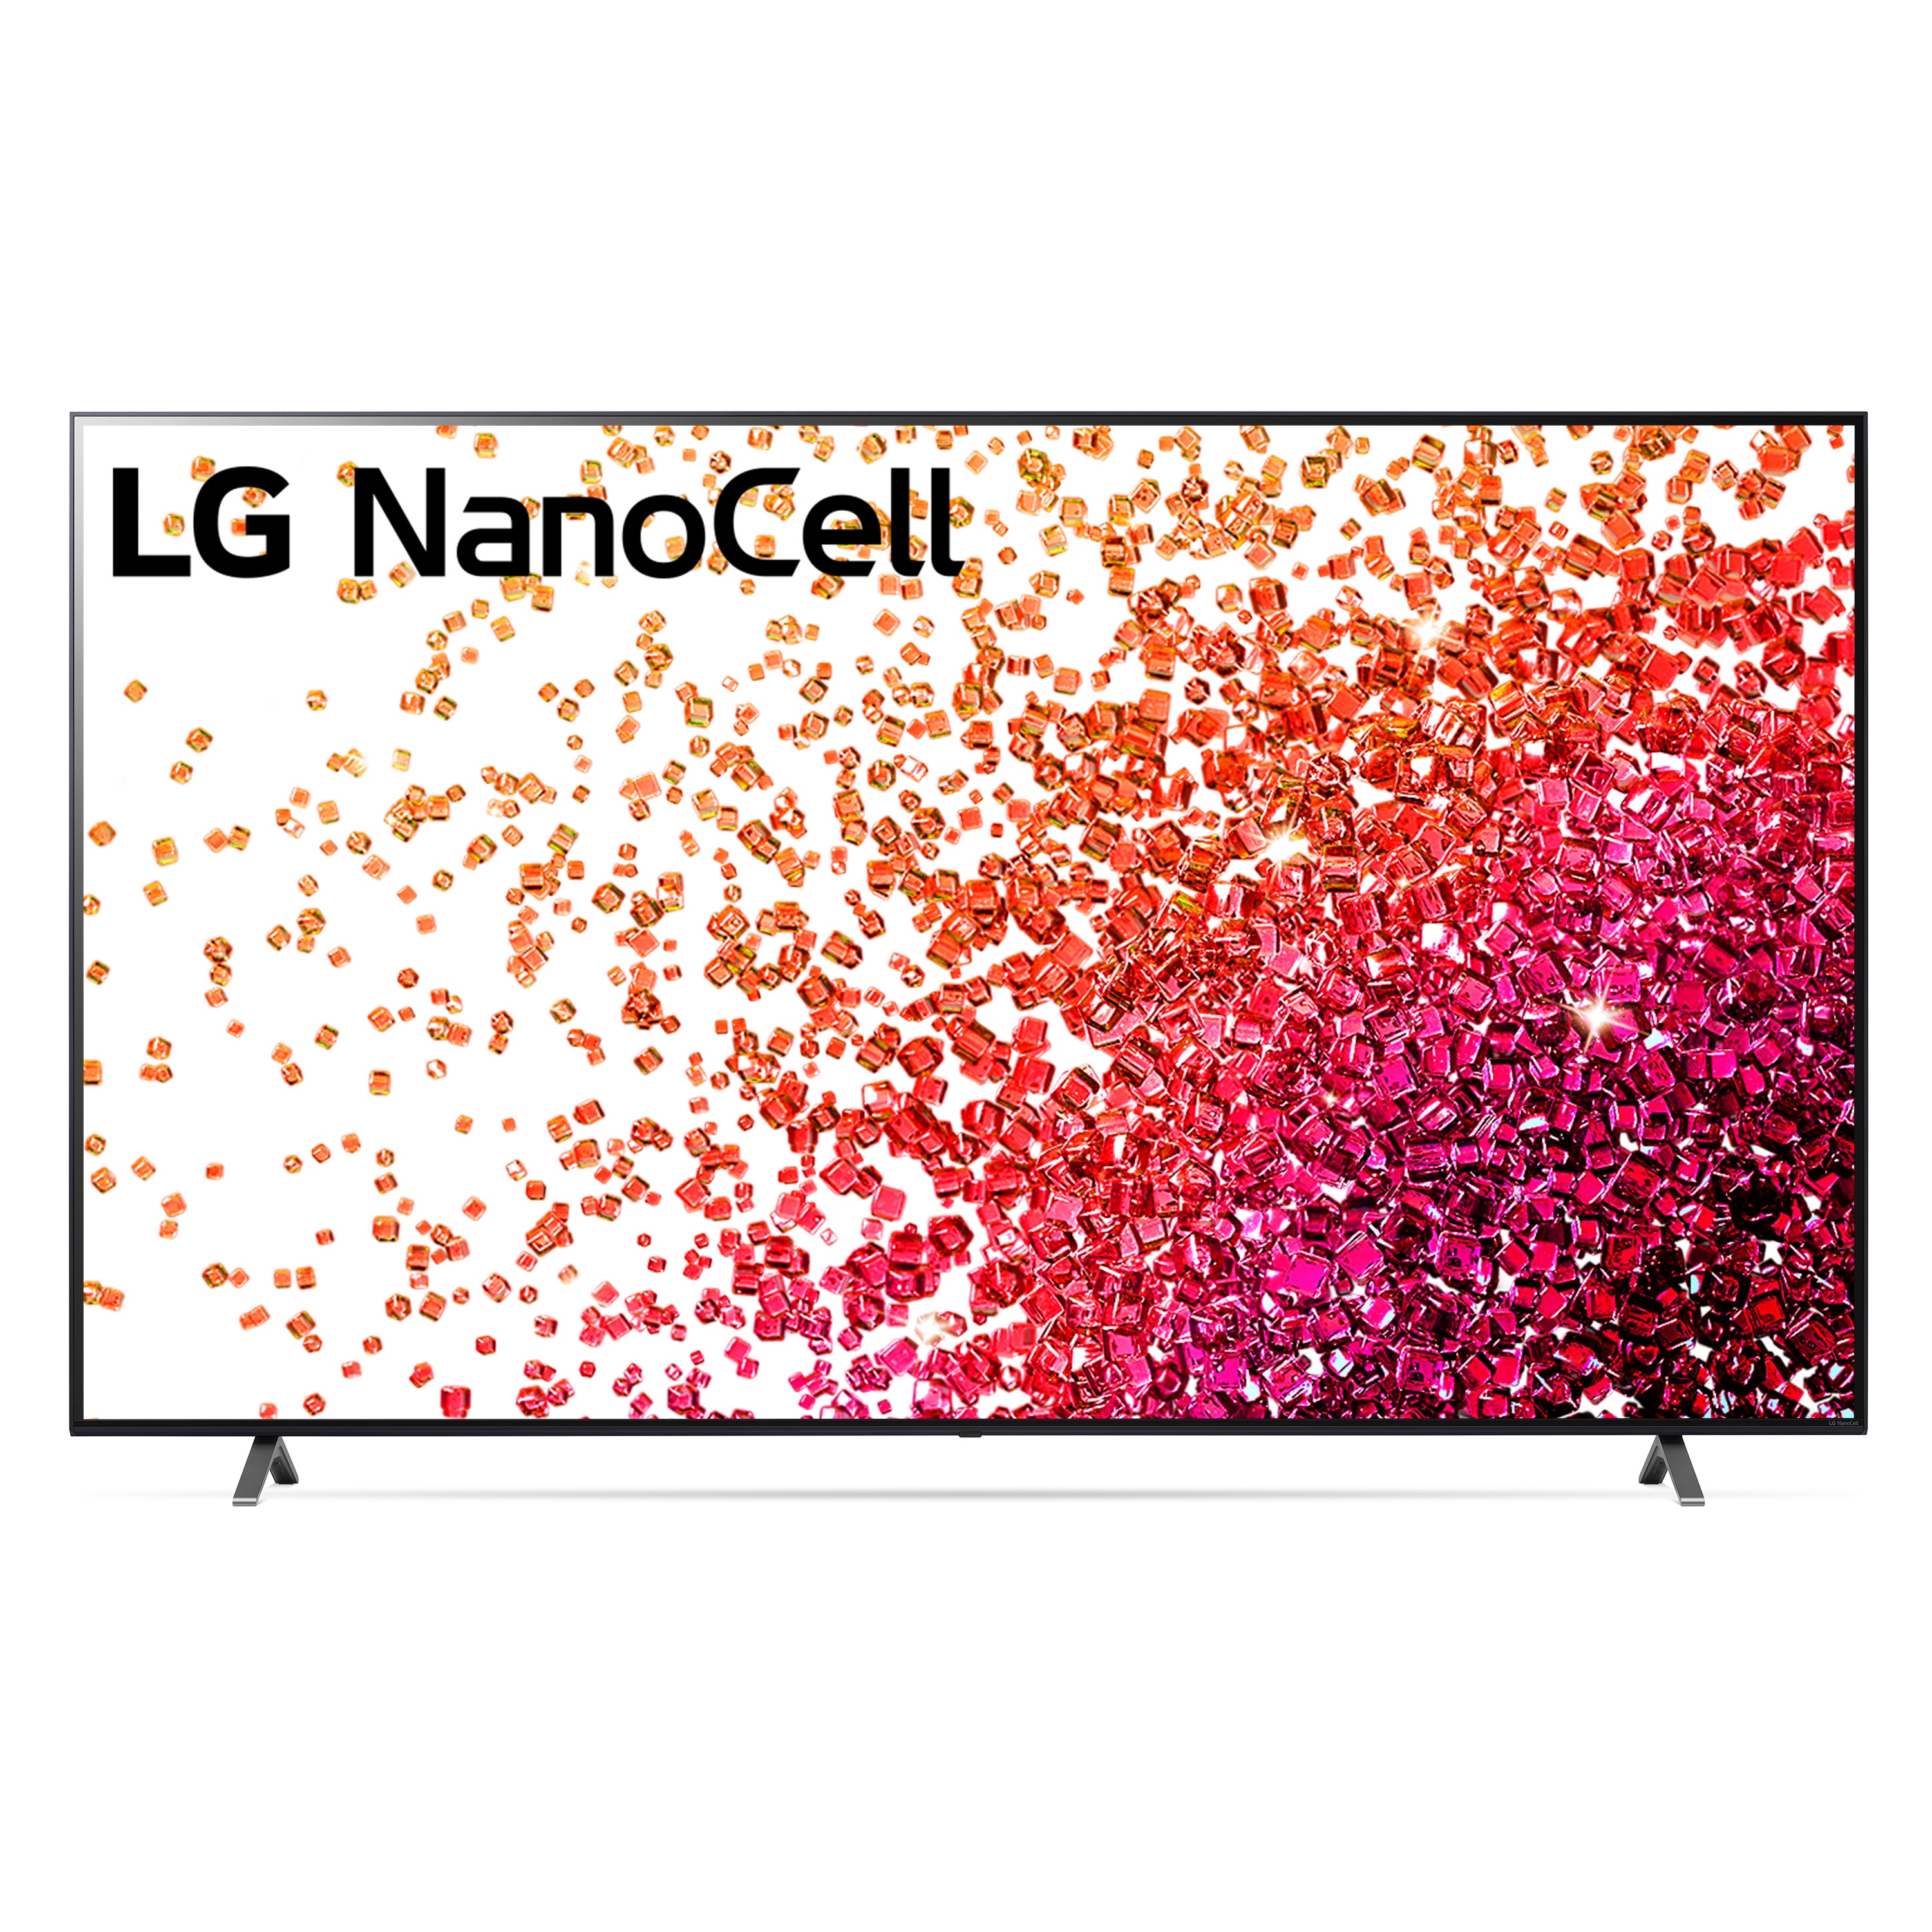 LG Electronics LG NanoCell 75 Series 2021 75 inch 4K Smart UHD TV with ThinQ (74.5'' Diag) in the TVs department at Lowes.com